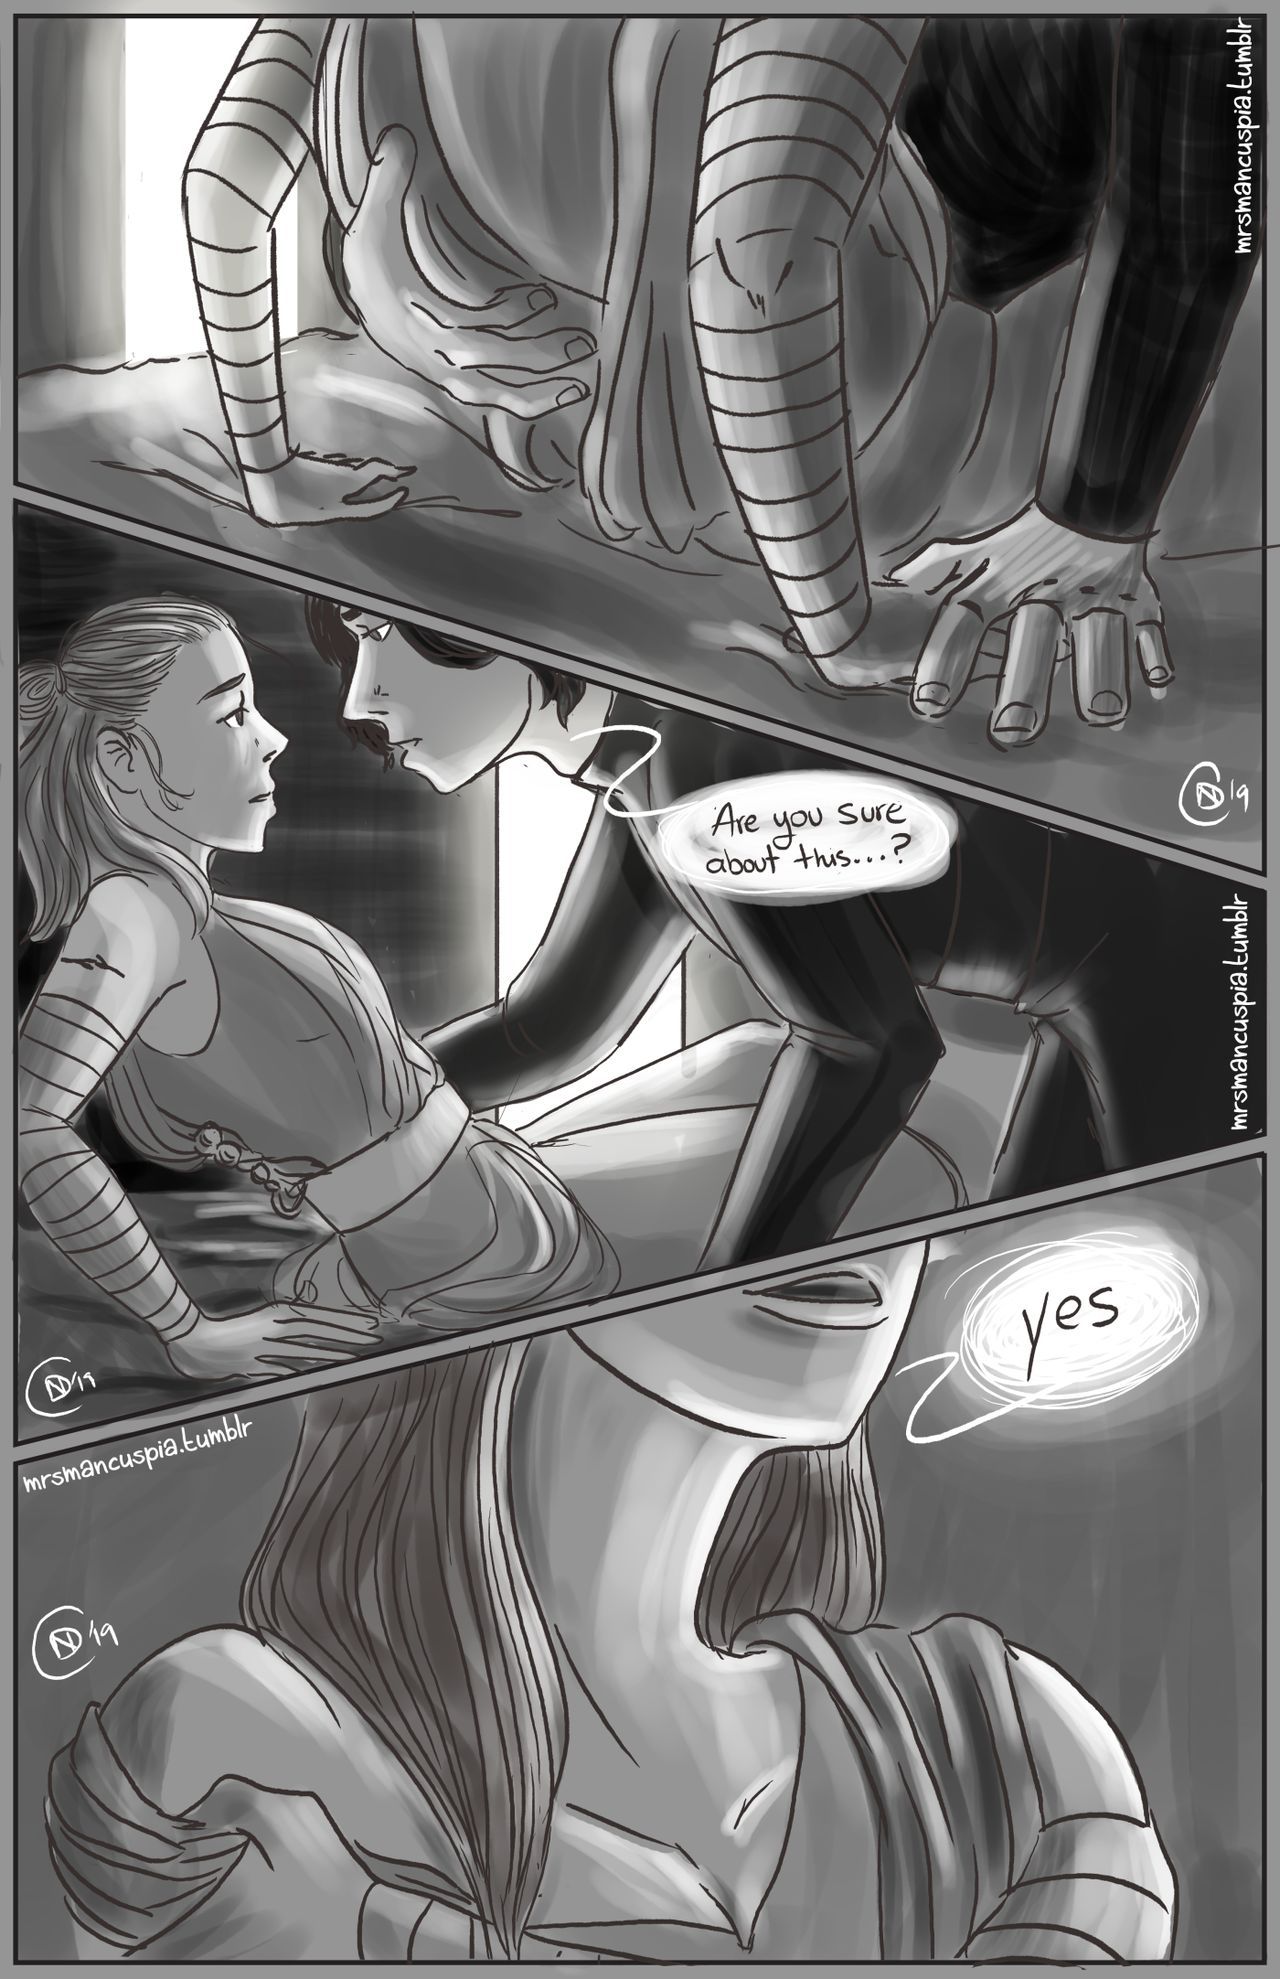 [Mrs Mancuspia] Bedroom Learning (Star Wars) [Ongoing] 21